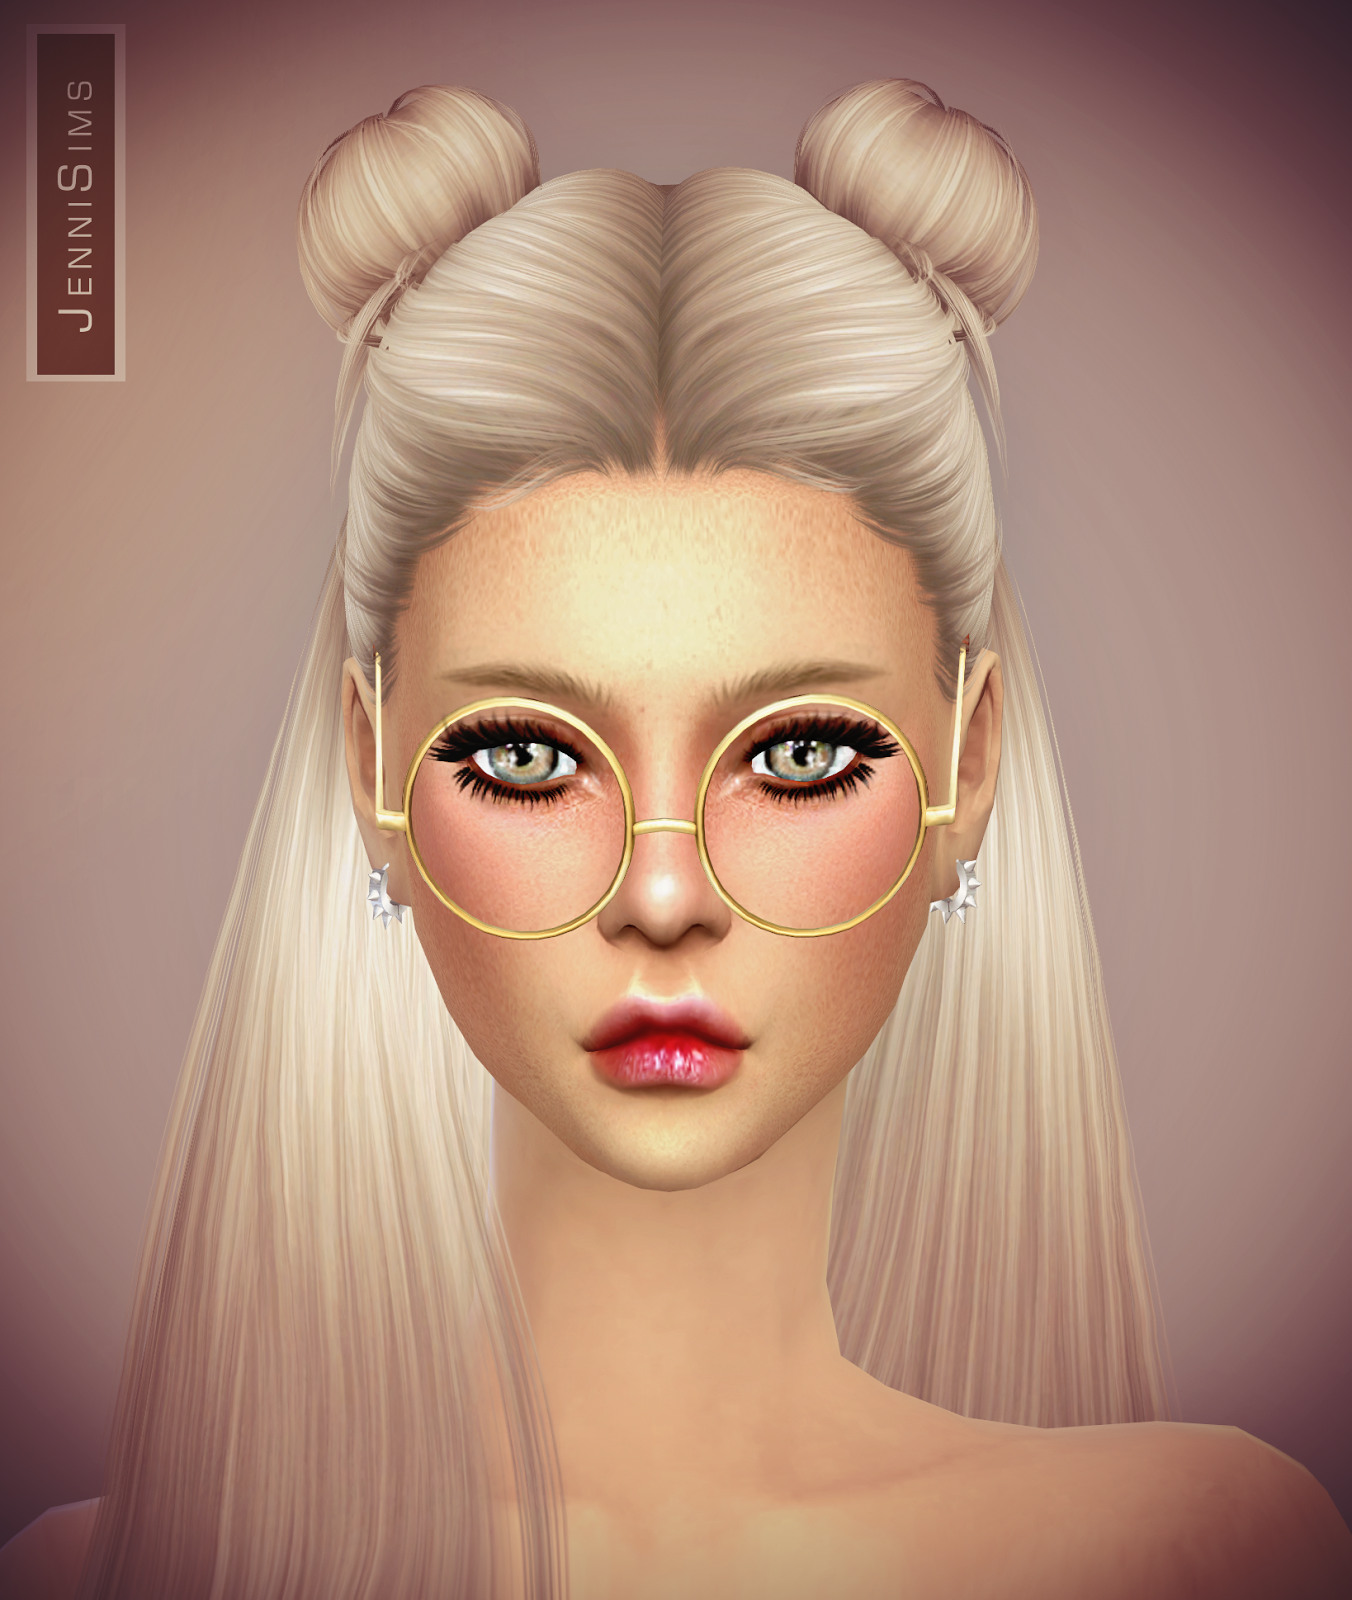 Jennisims Downloads Sims 4collection Glasses Male Female Base Game